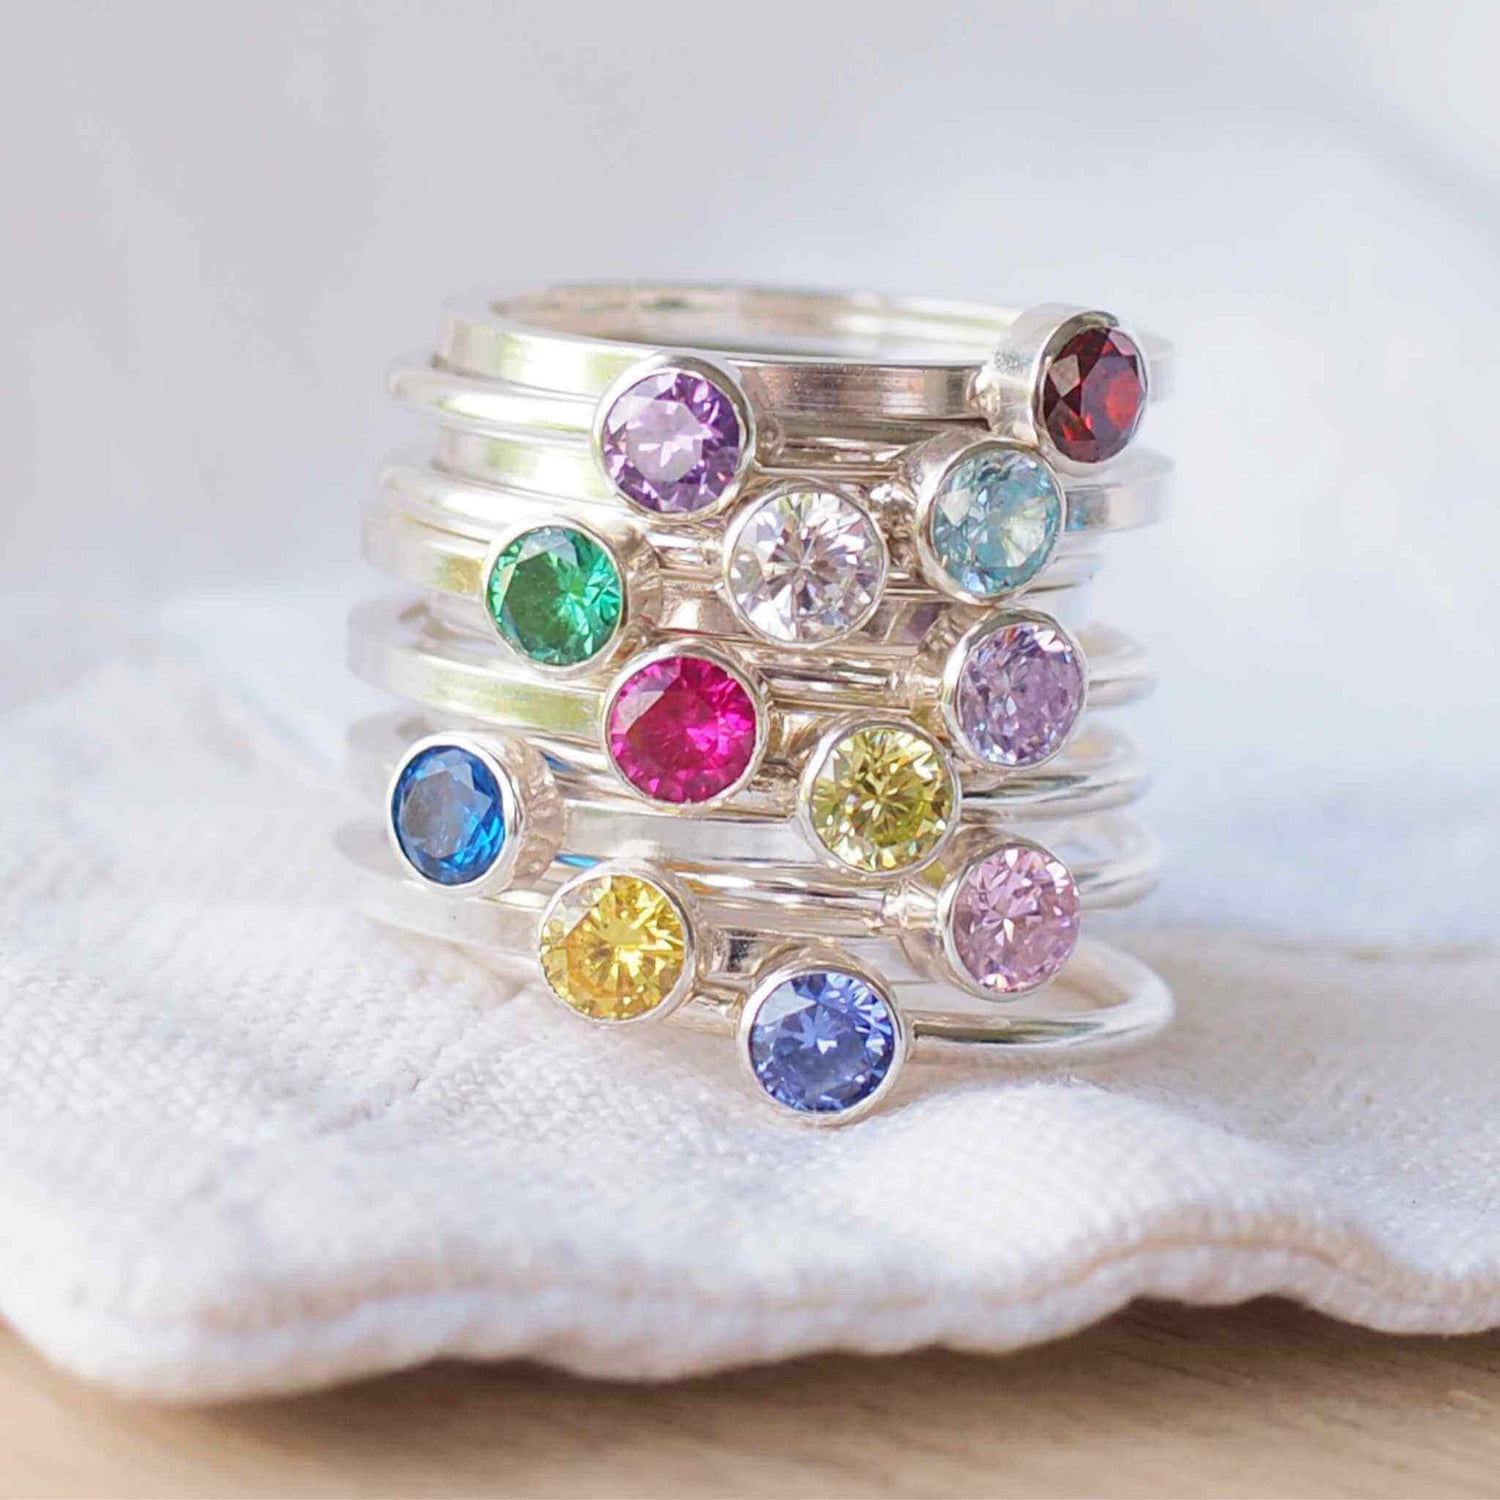 Stack of birthstone rings in Sterling Silver with a round coloured cubic zirconia in 4mm size to mark birthstones for every month. Handmade in Scotland by maram jewellery